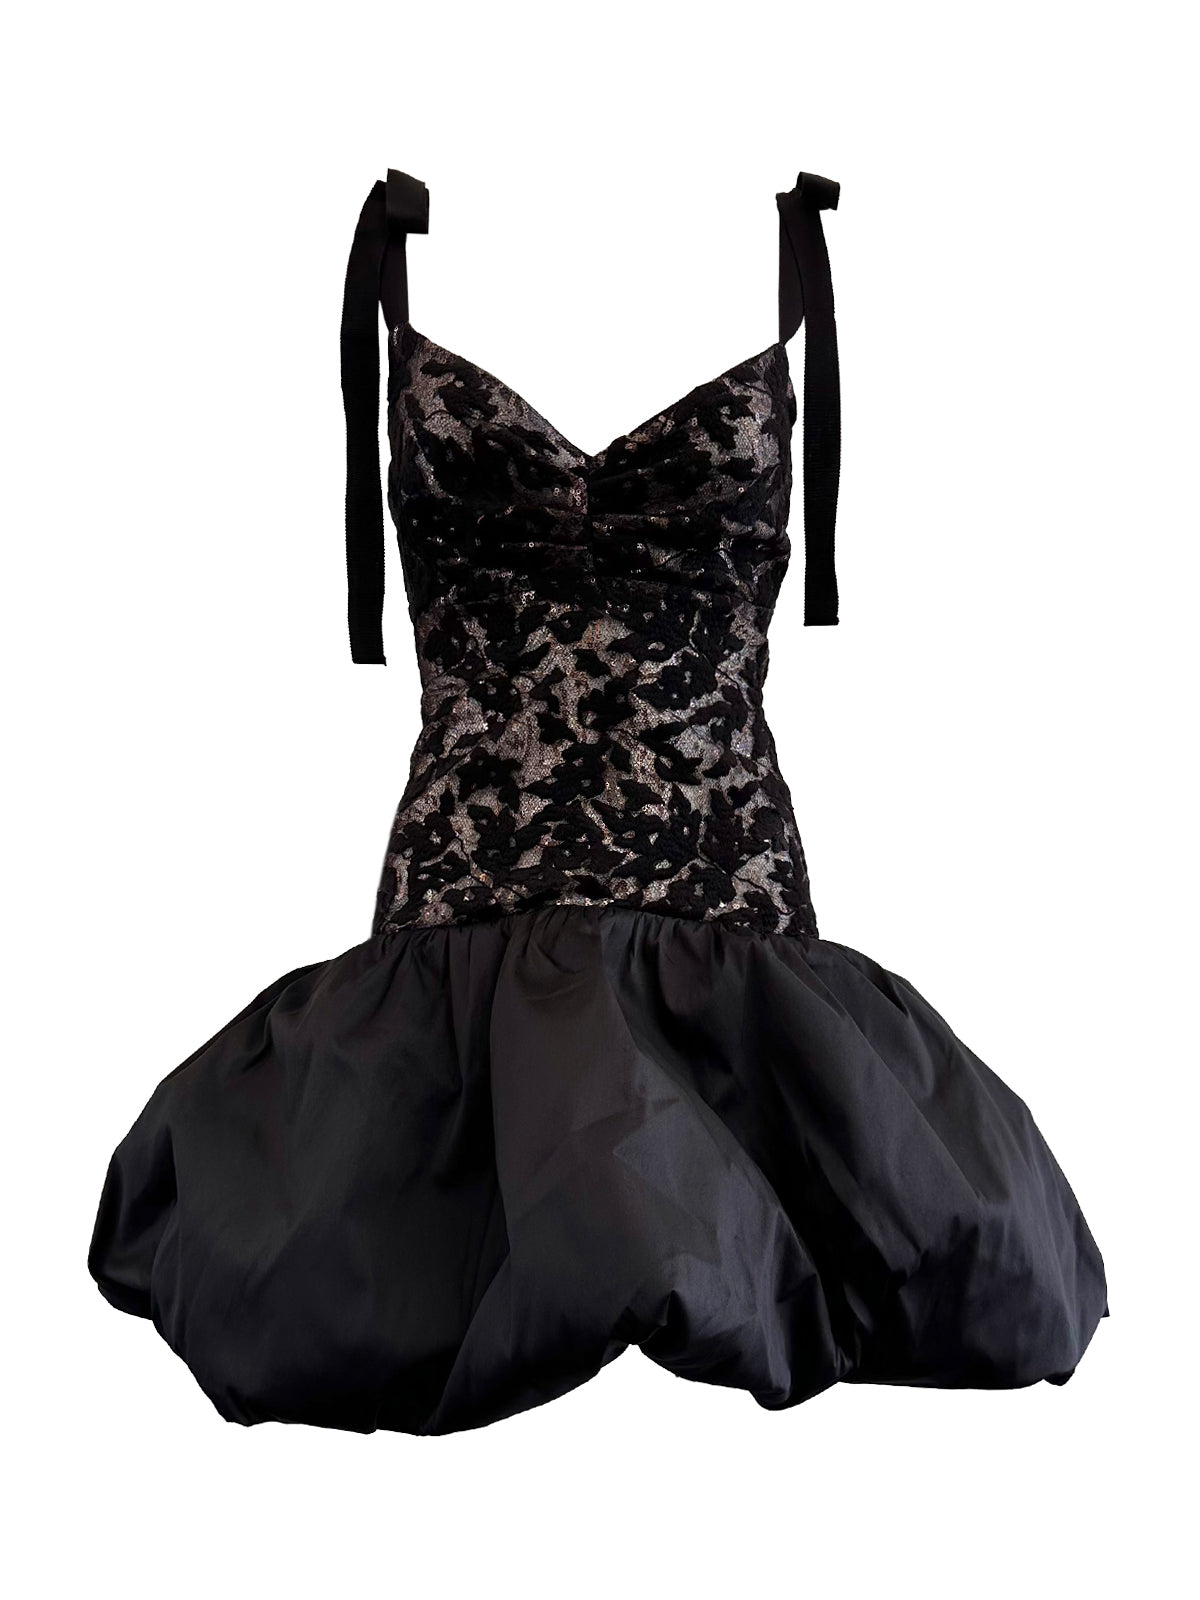 A Marguerite Dress Black with lace and bows.